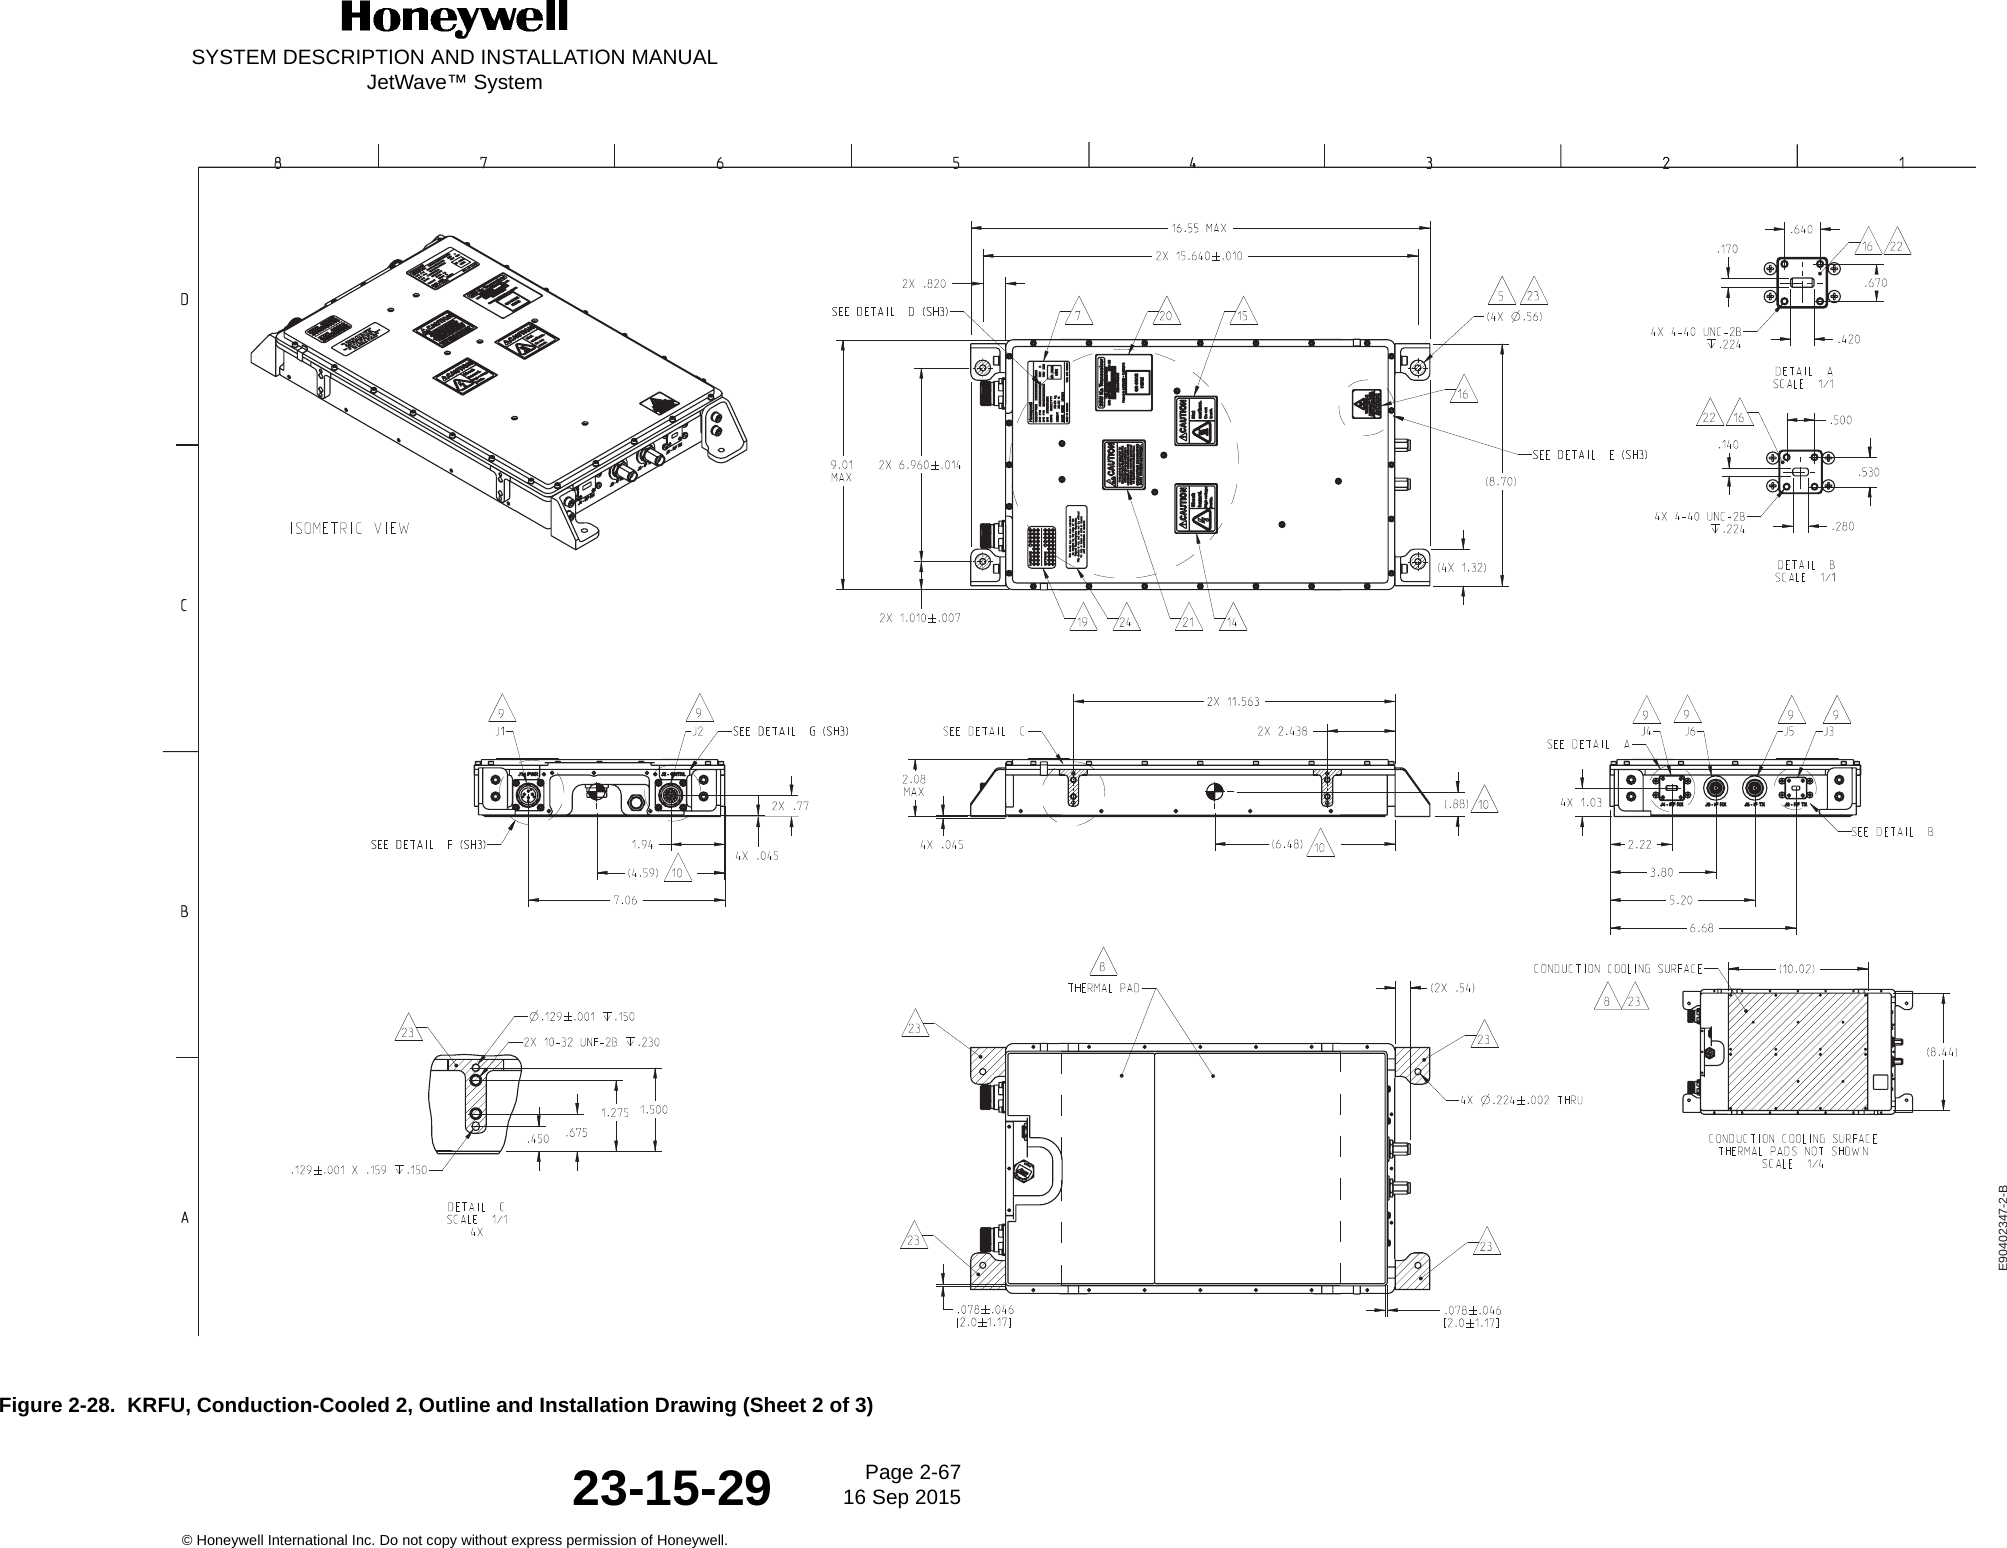 SYSTEM DESCRIPTION AND INSTALLATION MANUALJetWave™ SystemPage 2-67 16 Sep 2015© Honeywell International Inc. Do not copy without express permission of Honeywell.23-15-29Figure 2-28.  KRFU, Conduction-Cooled 2, Outline and Installation Drawing (Sheet 2 of 3)E90402347-2-B